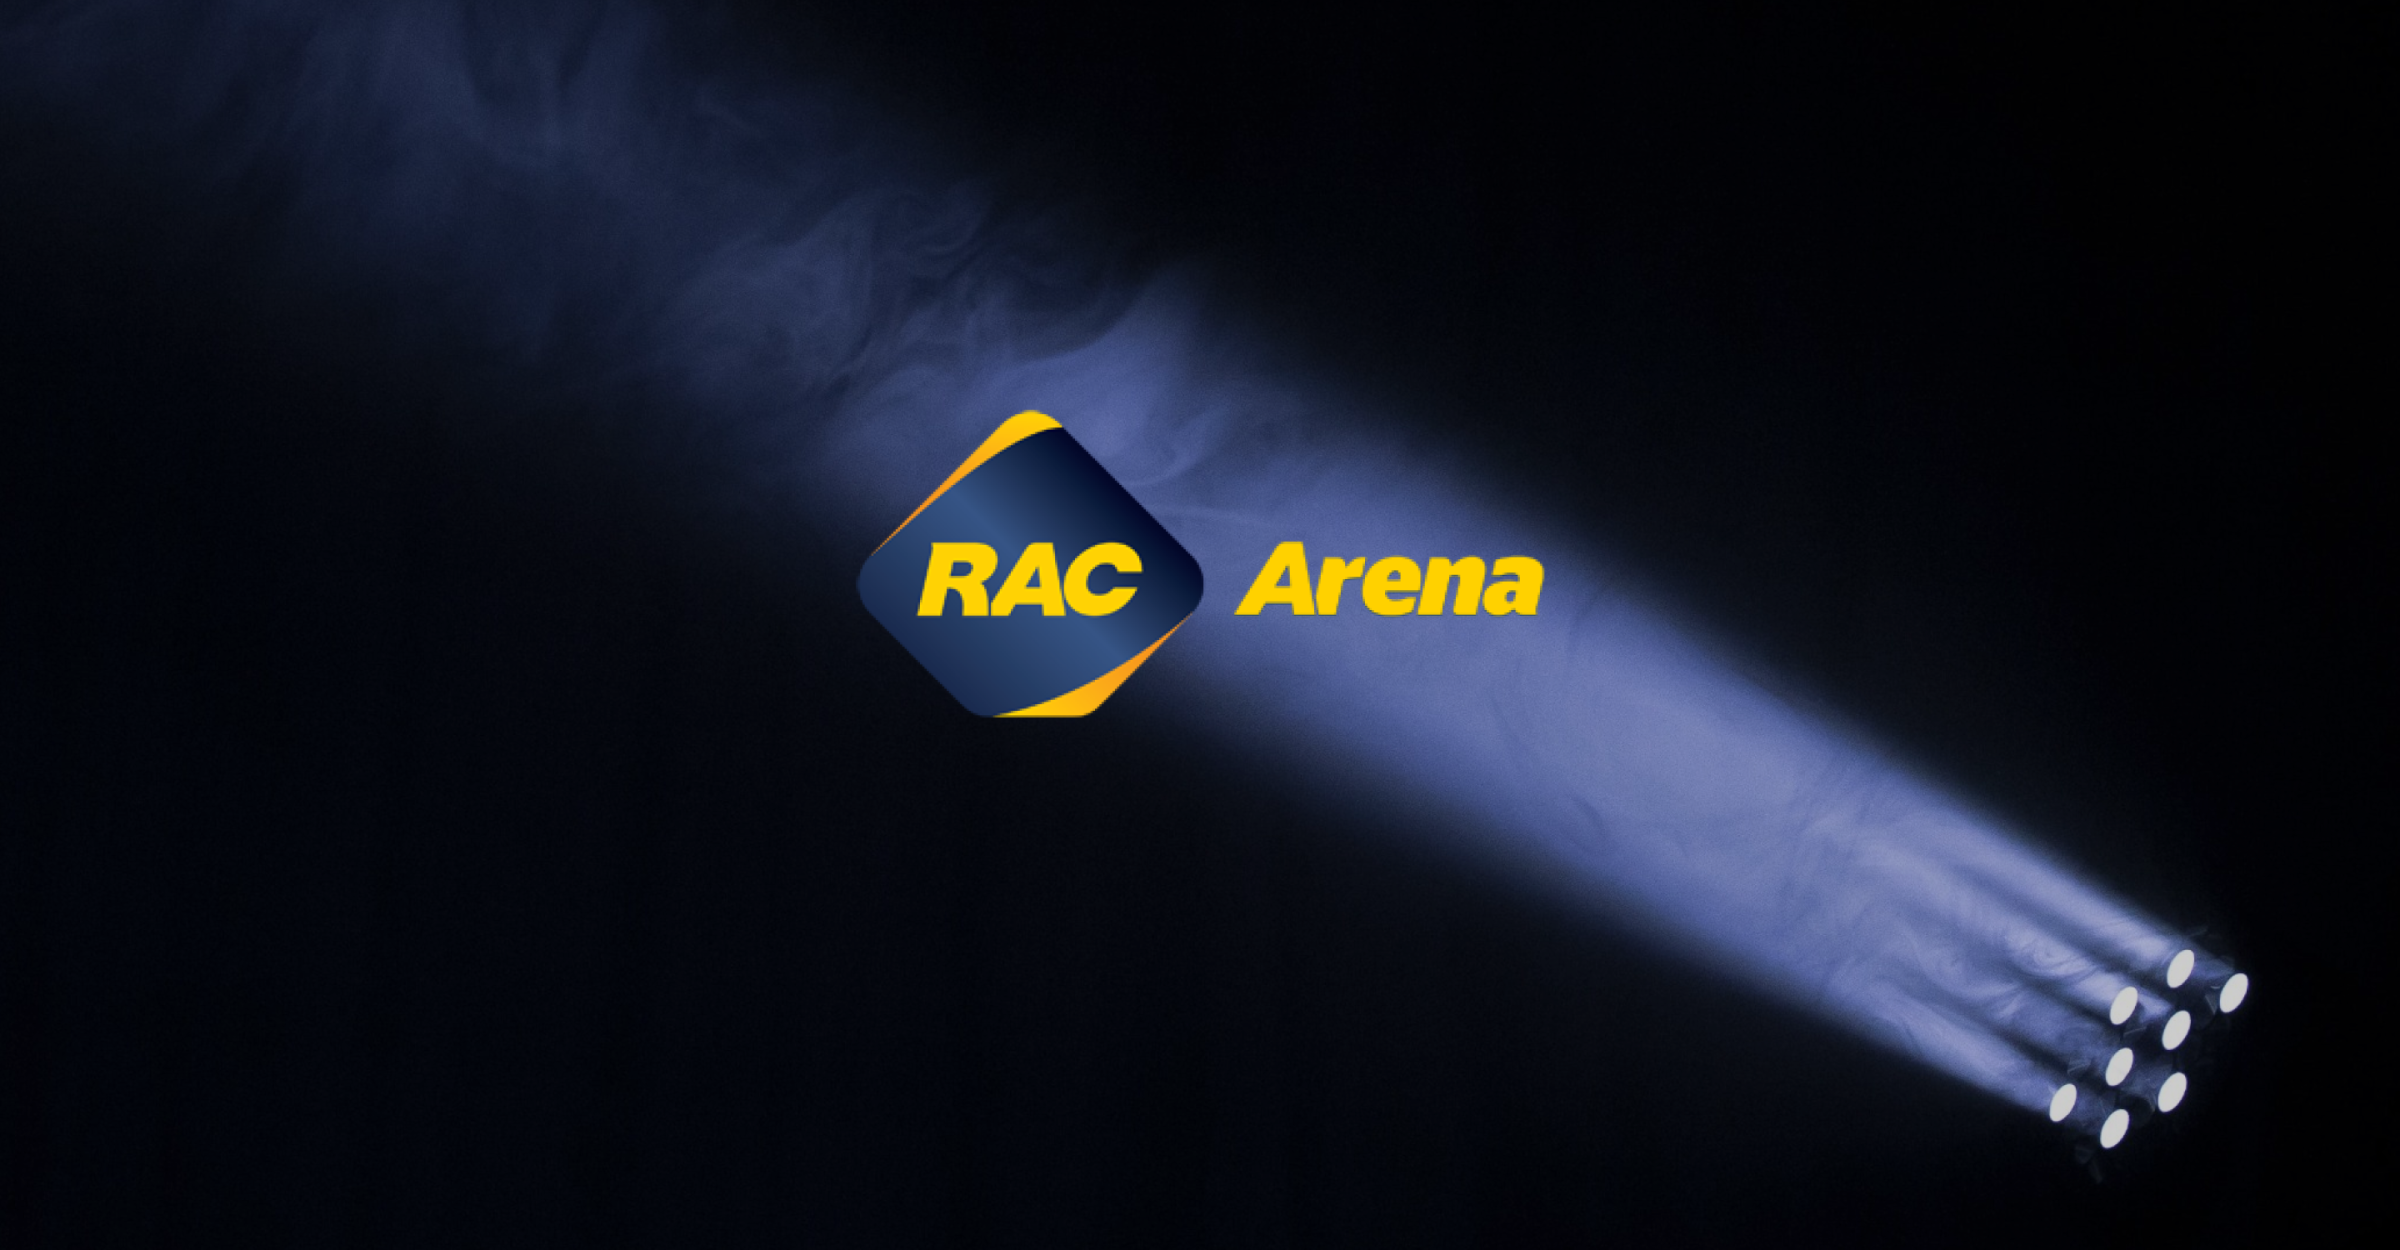 RAC logo in front of stage lights